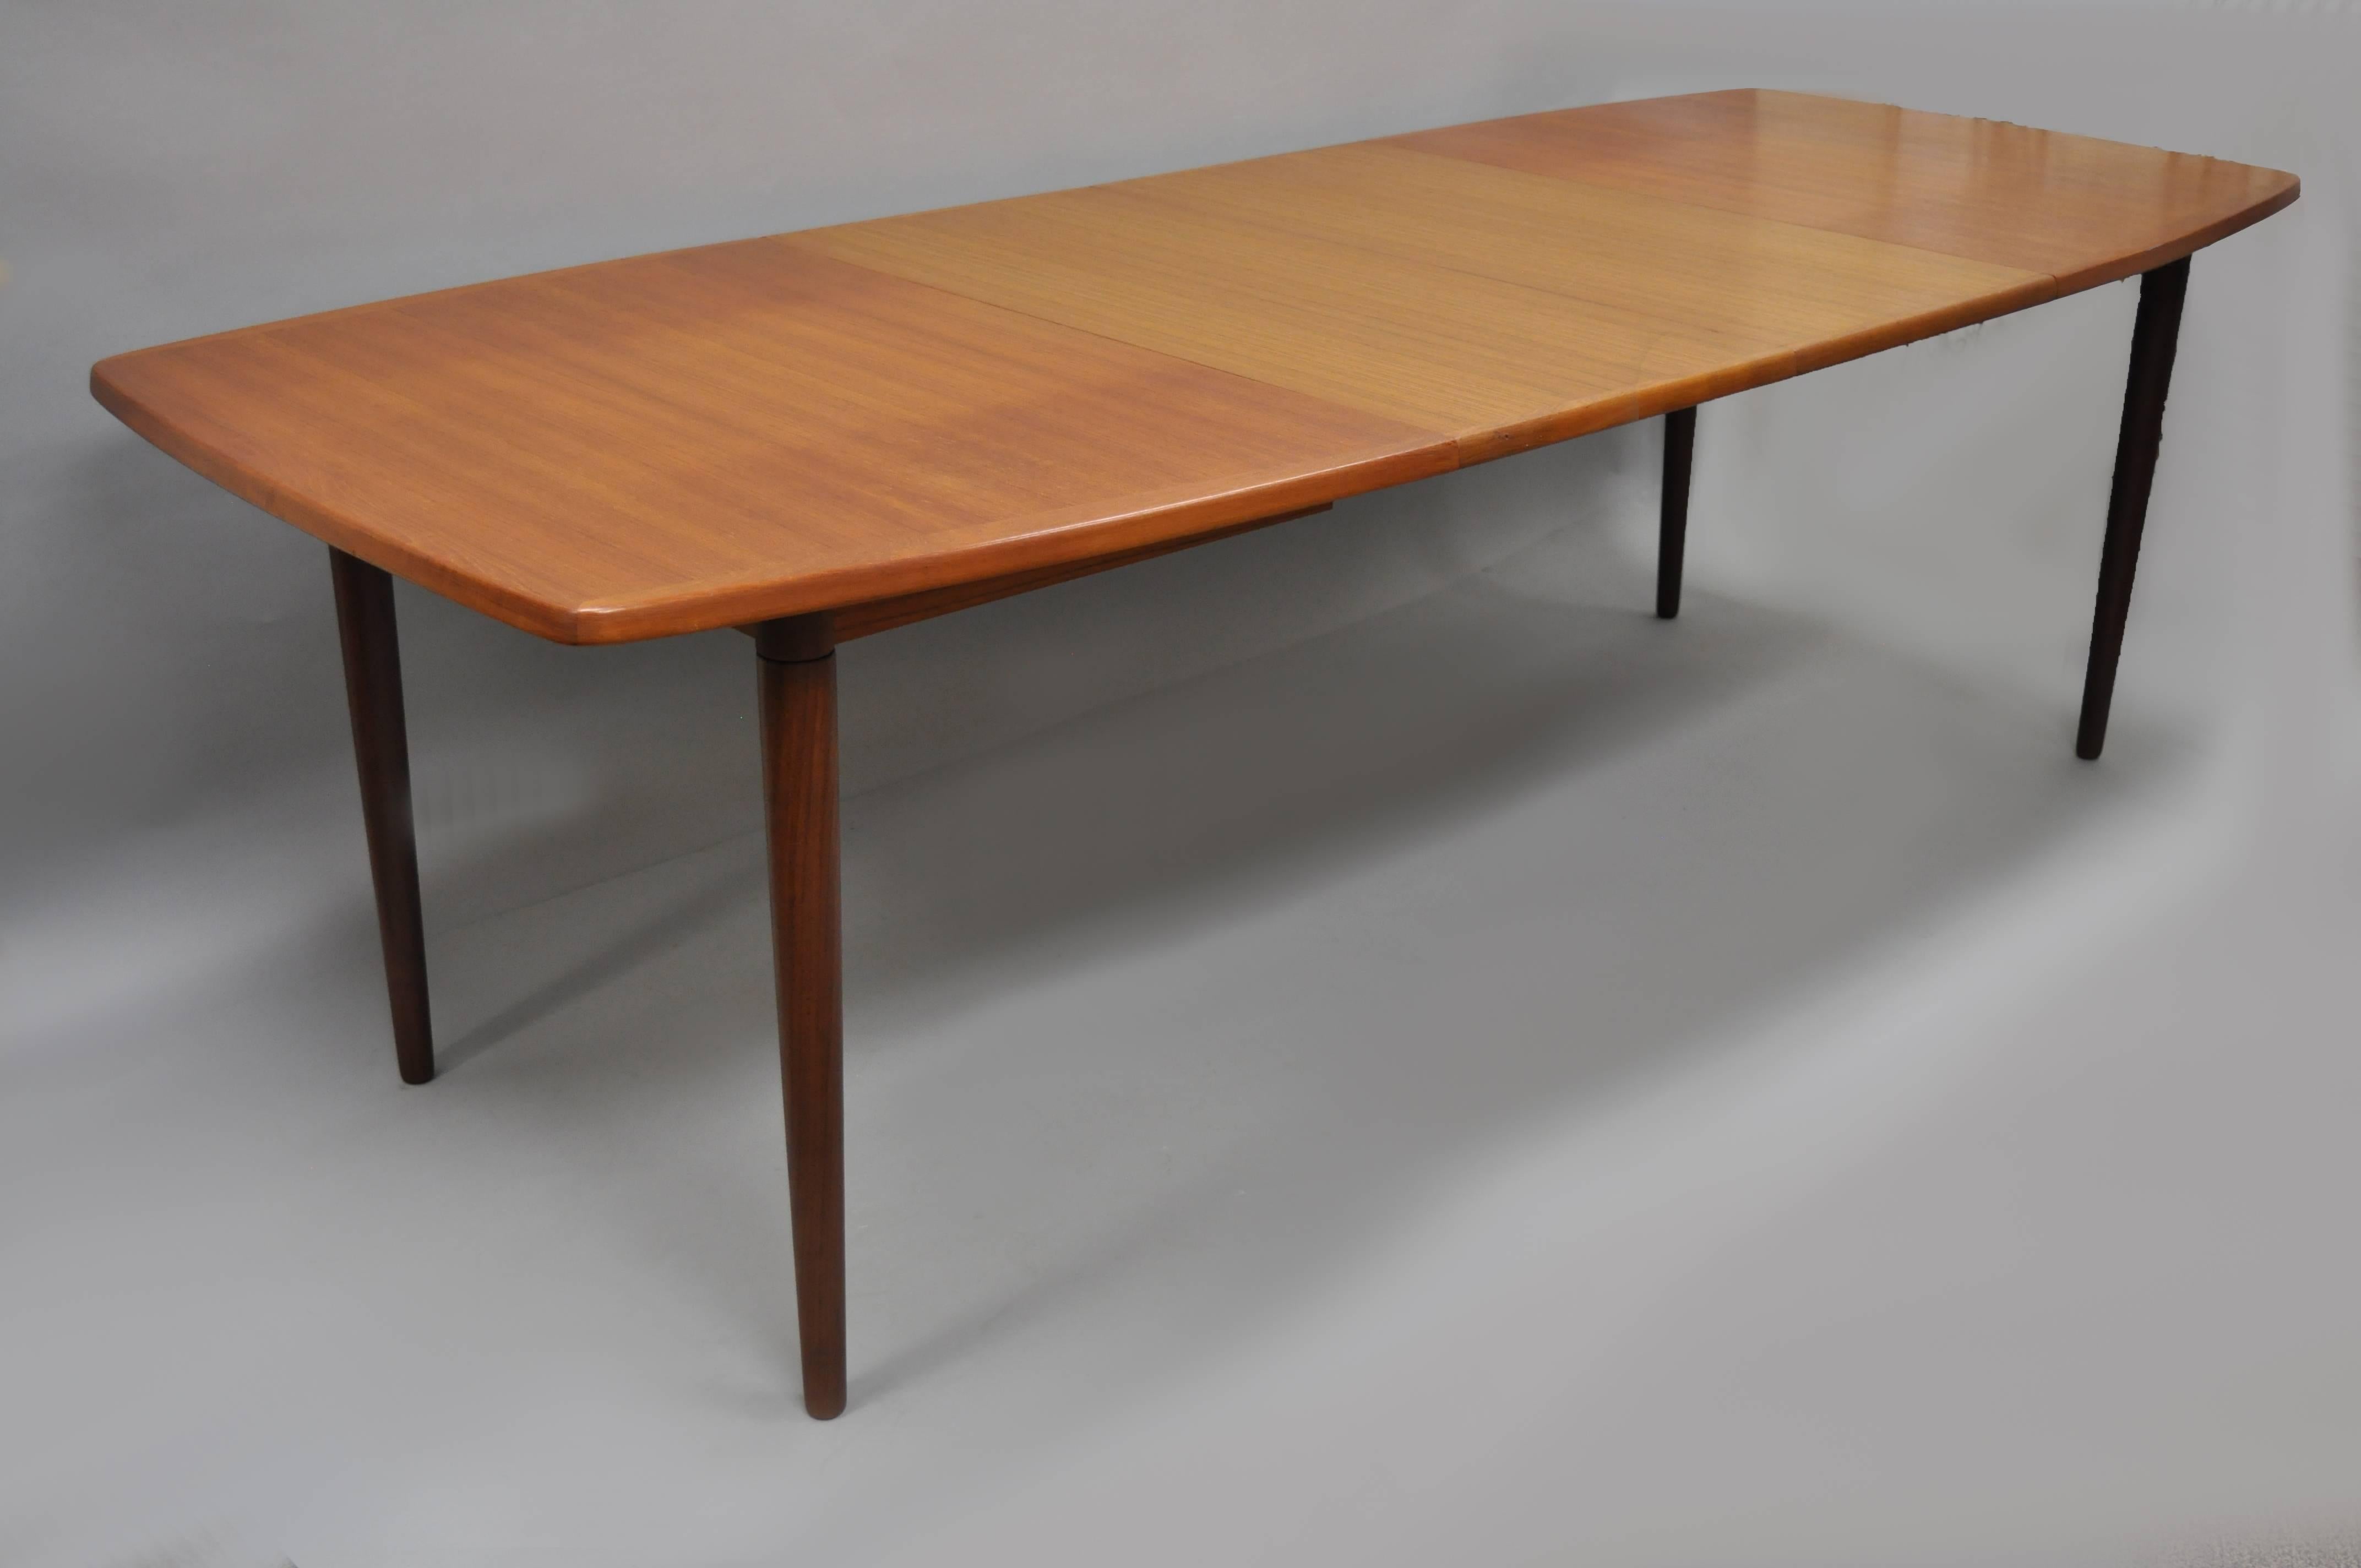 Mid-20th Century Mid Century Danish Modern Teak Dining Table with 2 Leaves by Gustav Bahus Norway